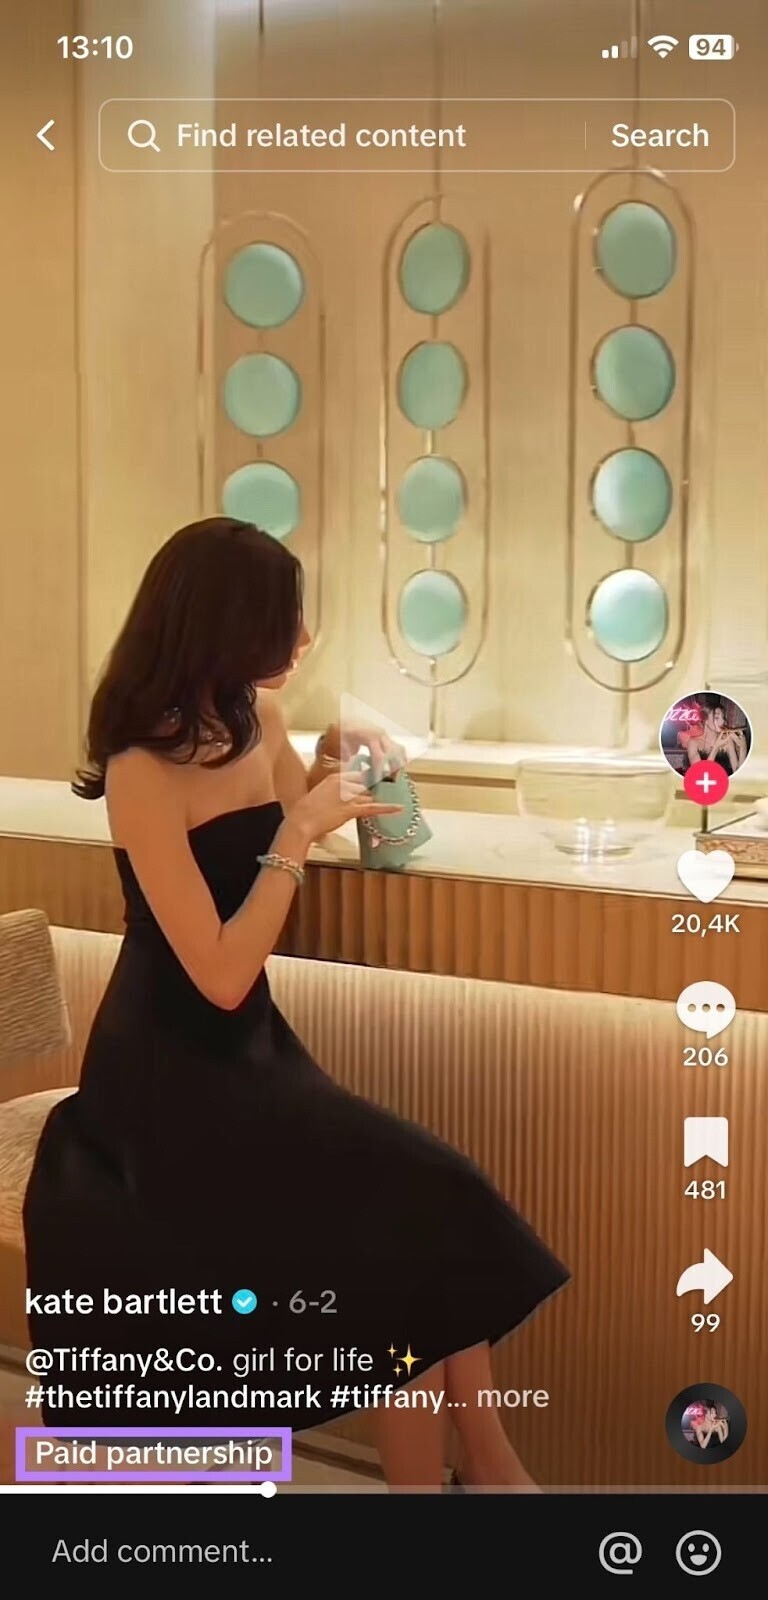 A TikTok ad for Tiffany&Co. by kate bartlett marked as "Paid partnership"